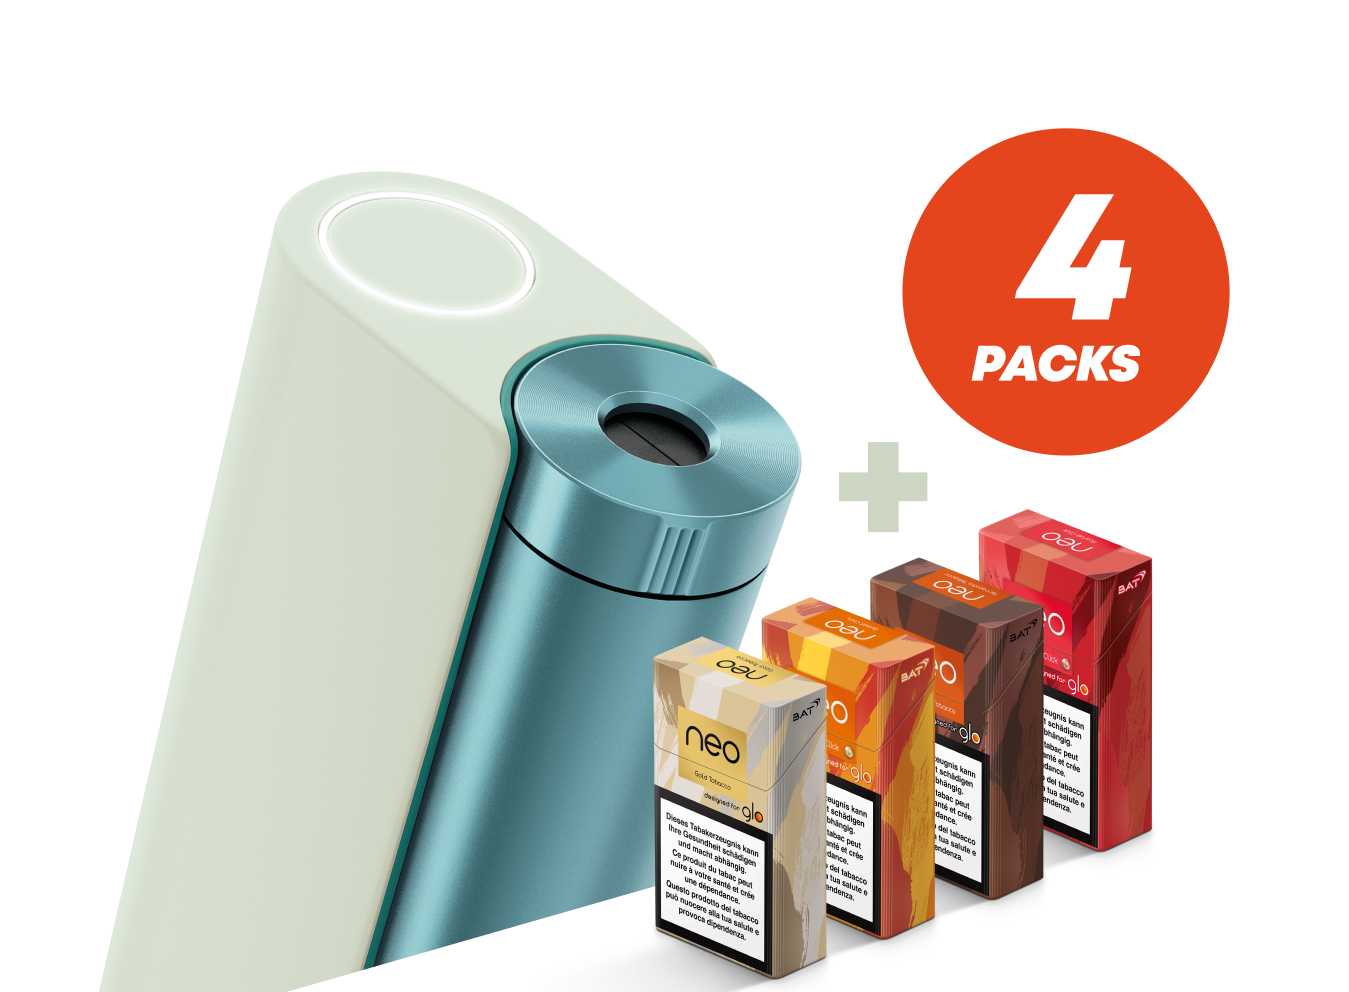 Our welcome offer: a glo™ HYPER X2 tobacco heater and 4 packs of neo™ Tobacco stick